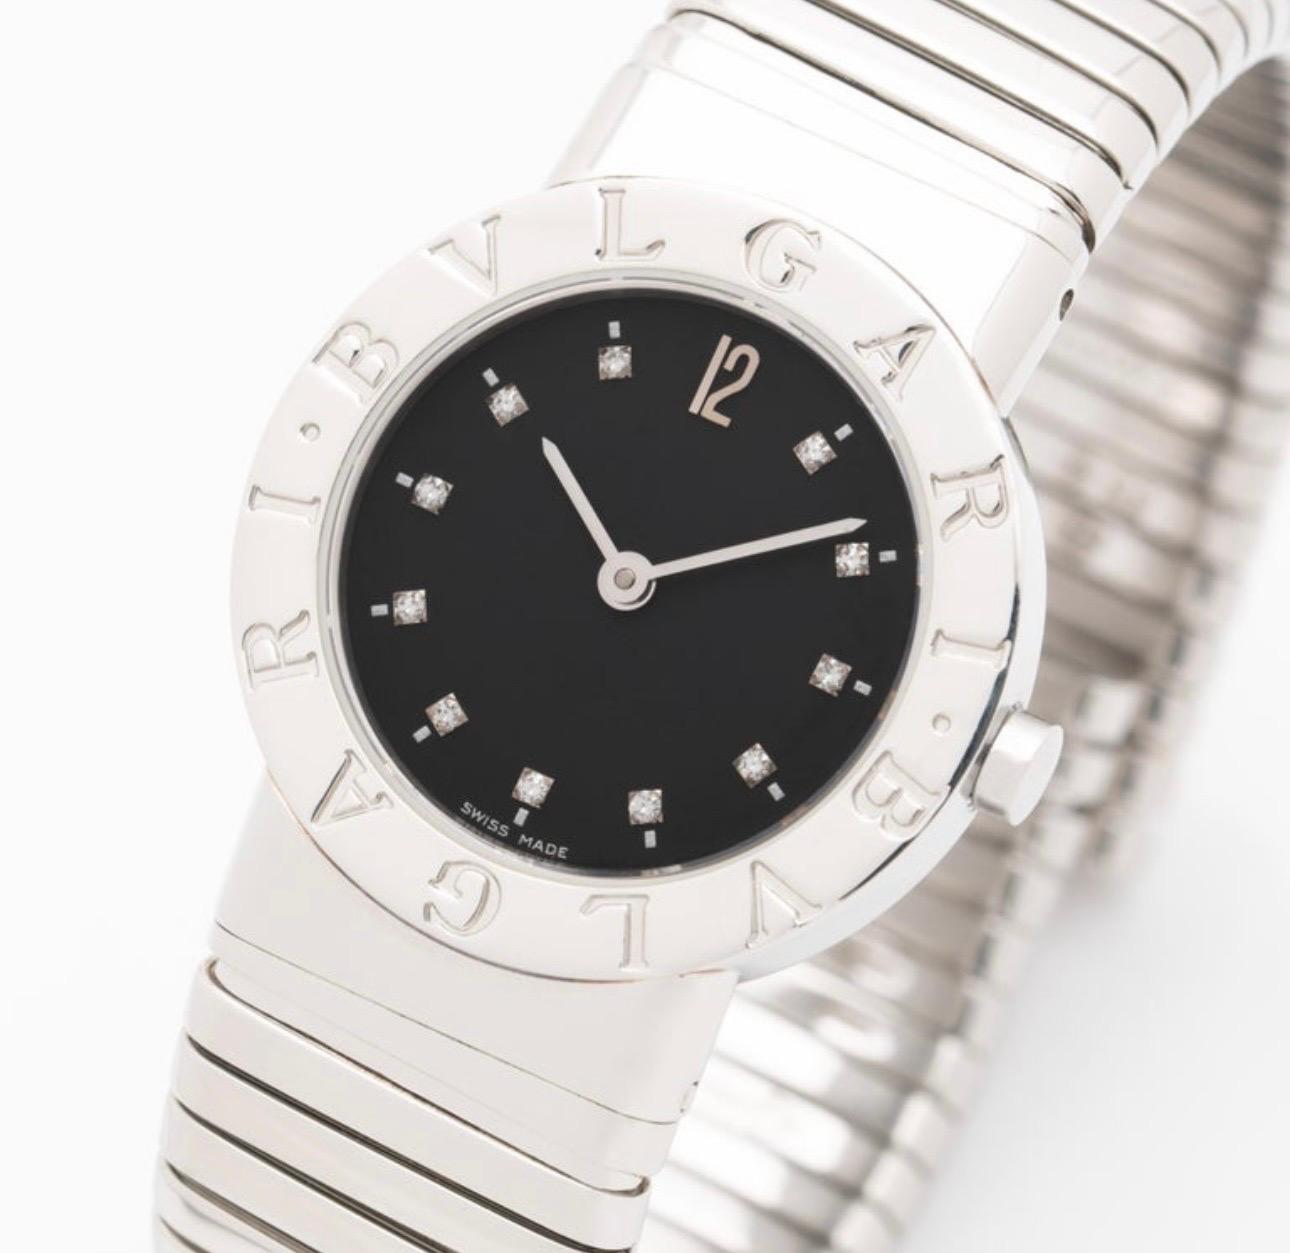 Stunning stainless steel, Bvlgari serpentine, watch with diamond hour markers. These timeless iconic watches are perfect for every day, where we’re dressing up in the evening the watch keeps perfect time and just had his battery replaced. But it’s